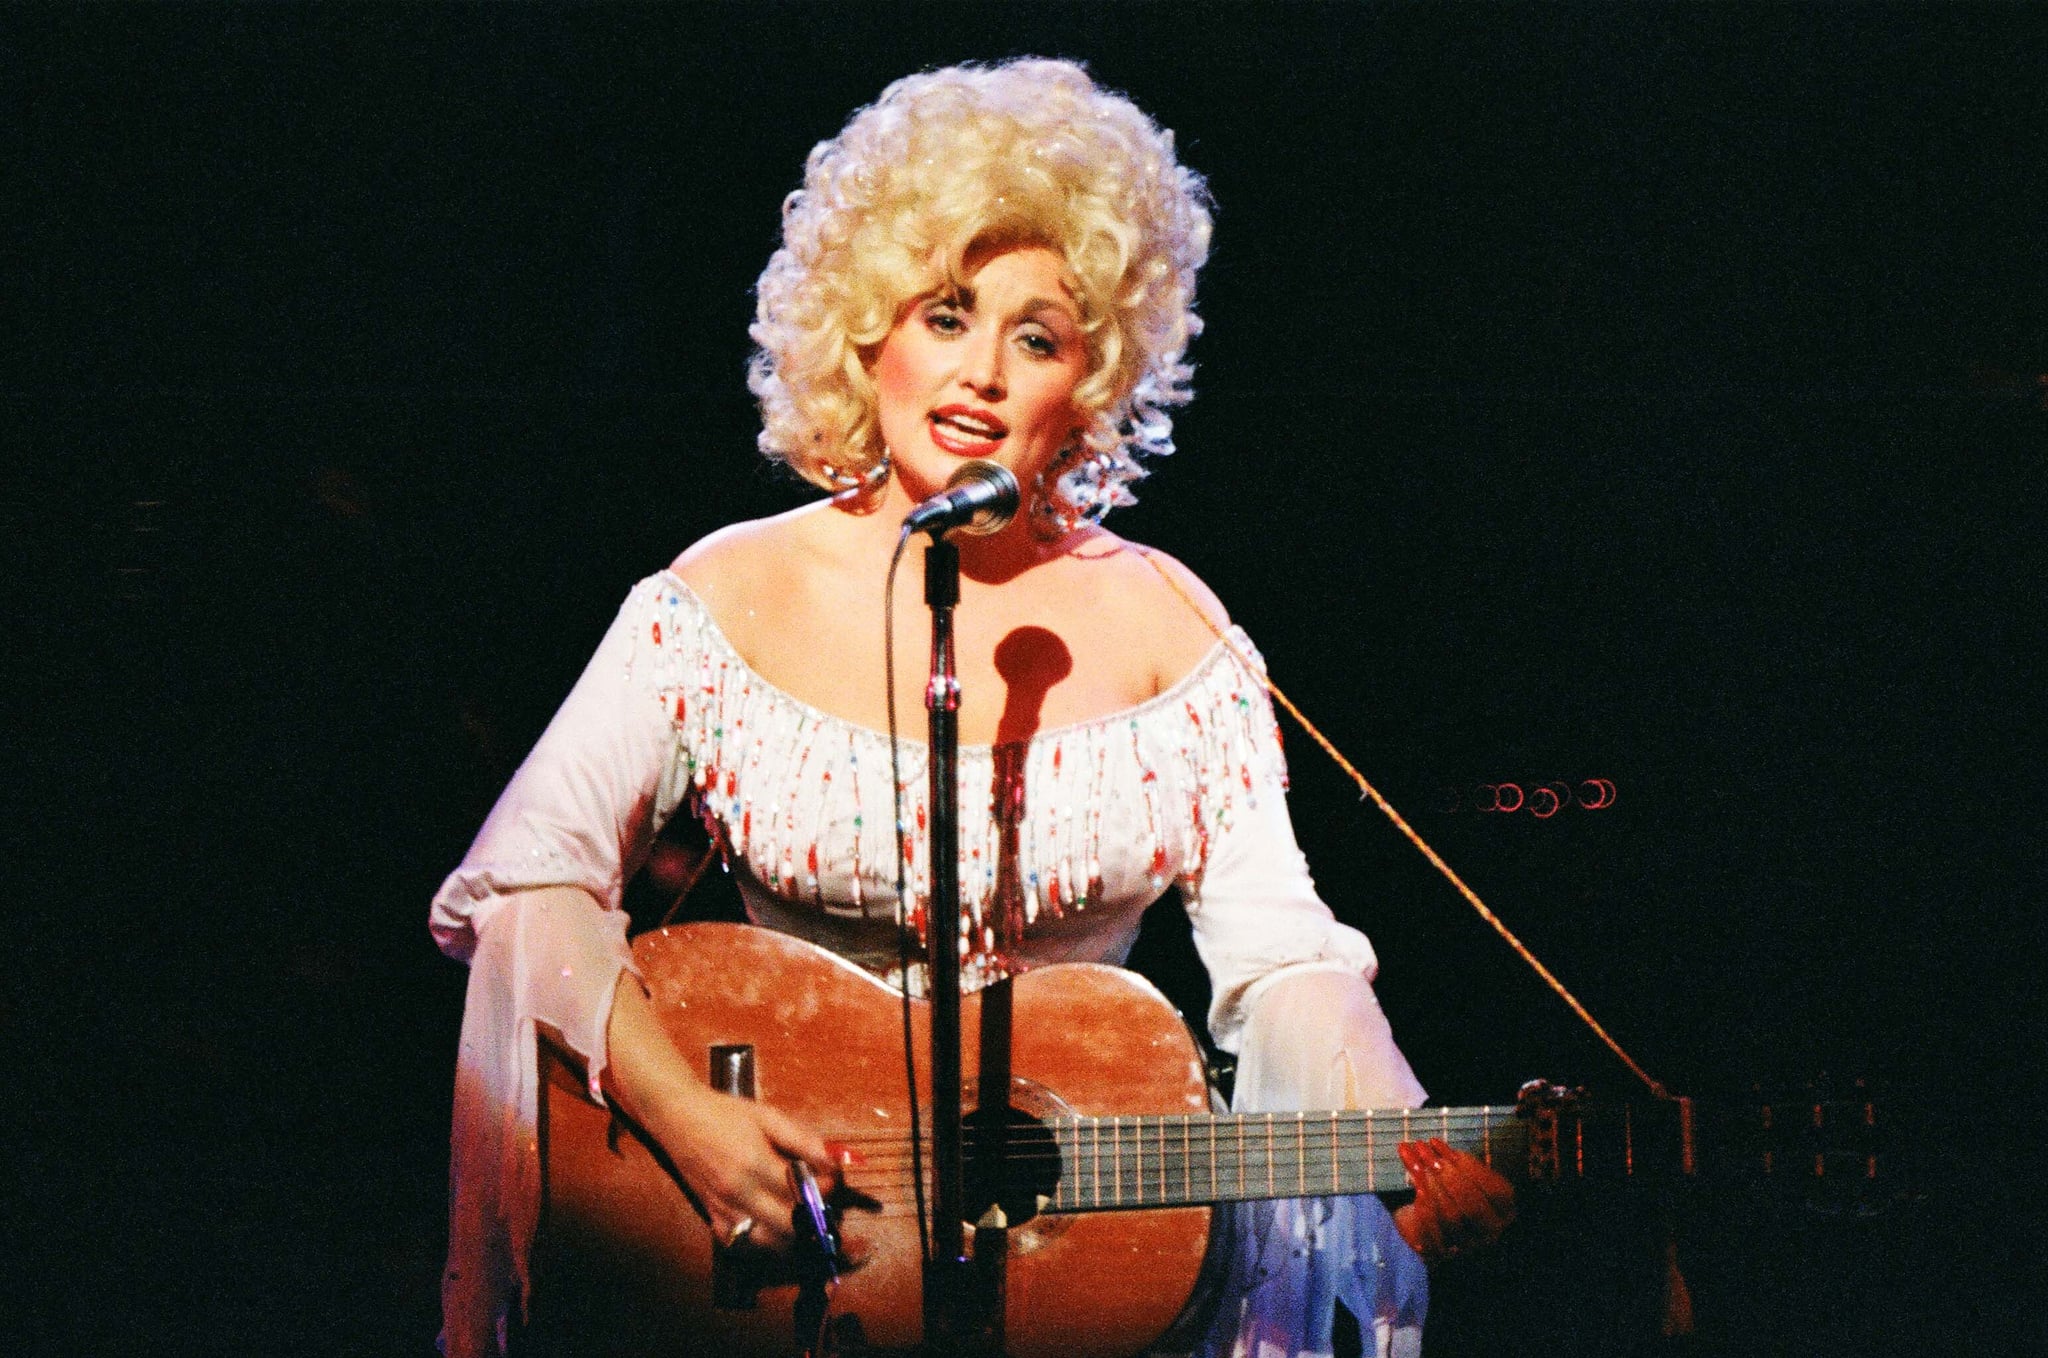 LONDON, UNITED KINGDOM - MARCH 4: Dolly Parton performs on stage at The Dominion Theatre on March 29th, 1983 in London, United Kingdom. (Photo by Pete Still/Redferns)